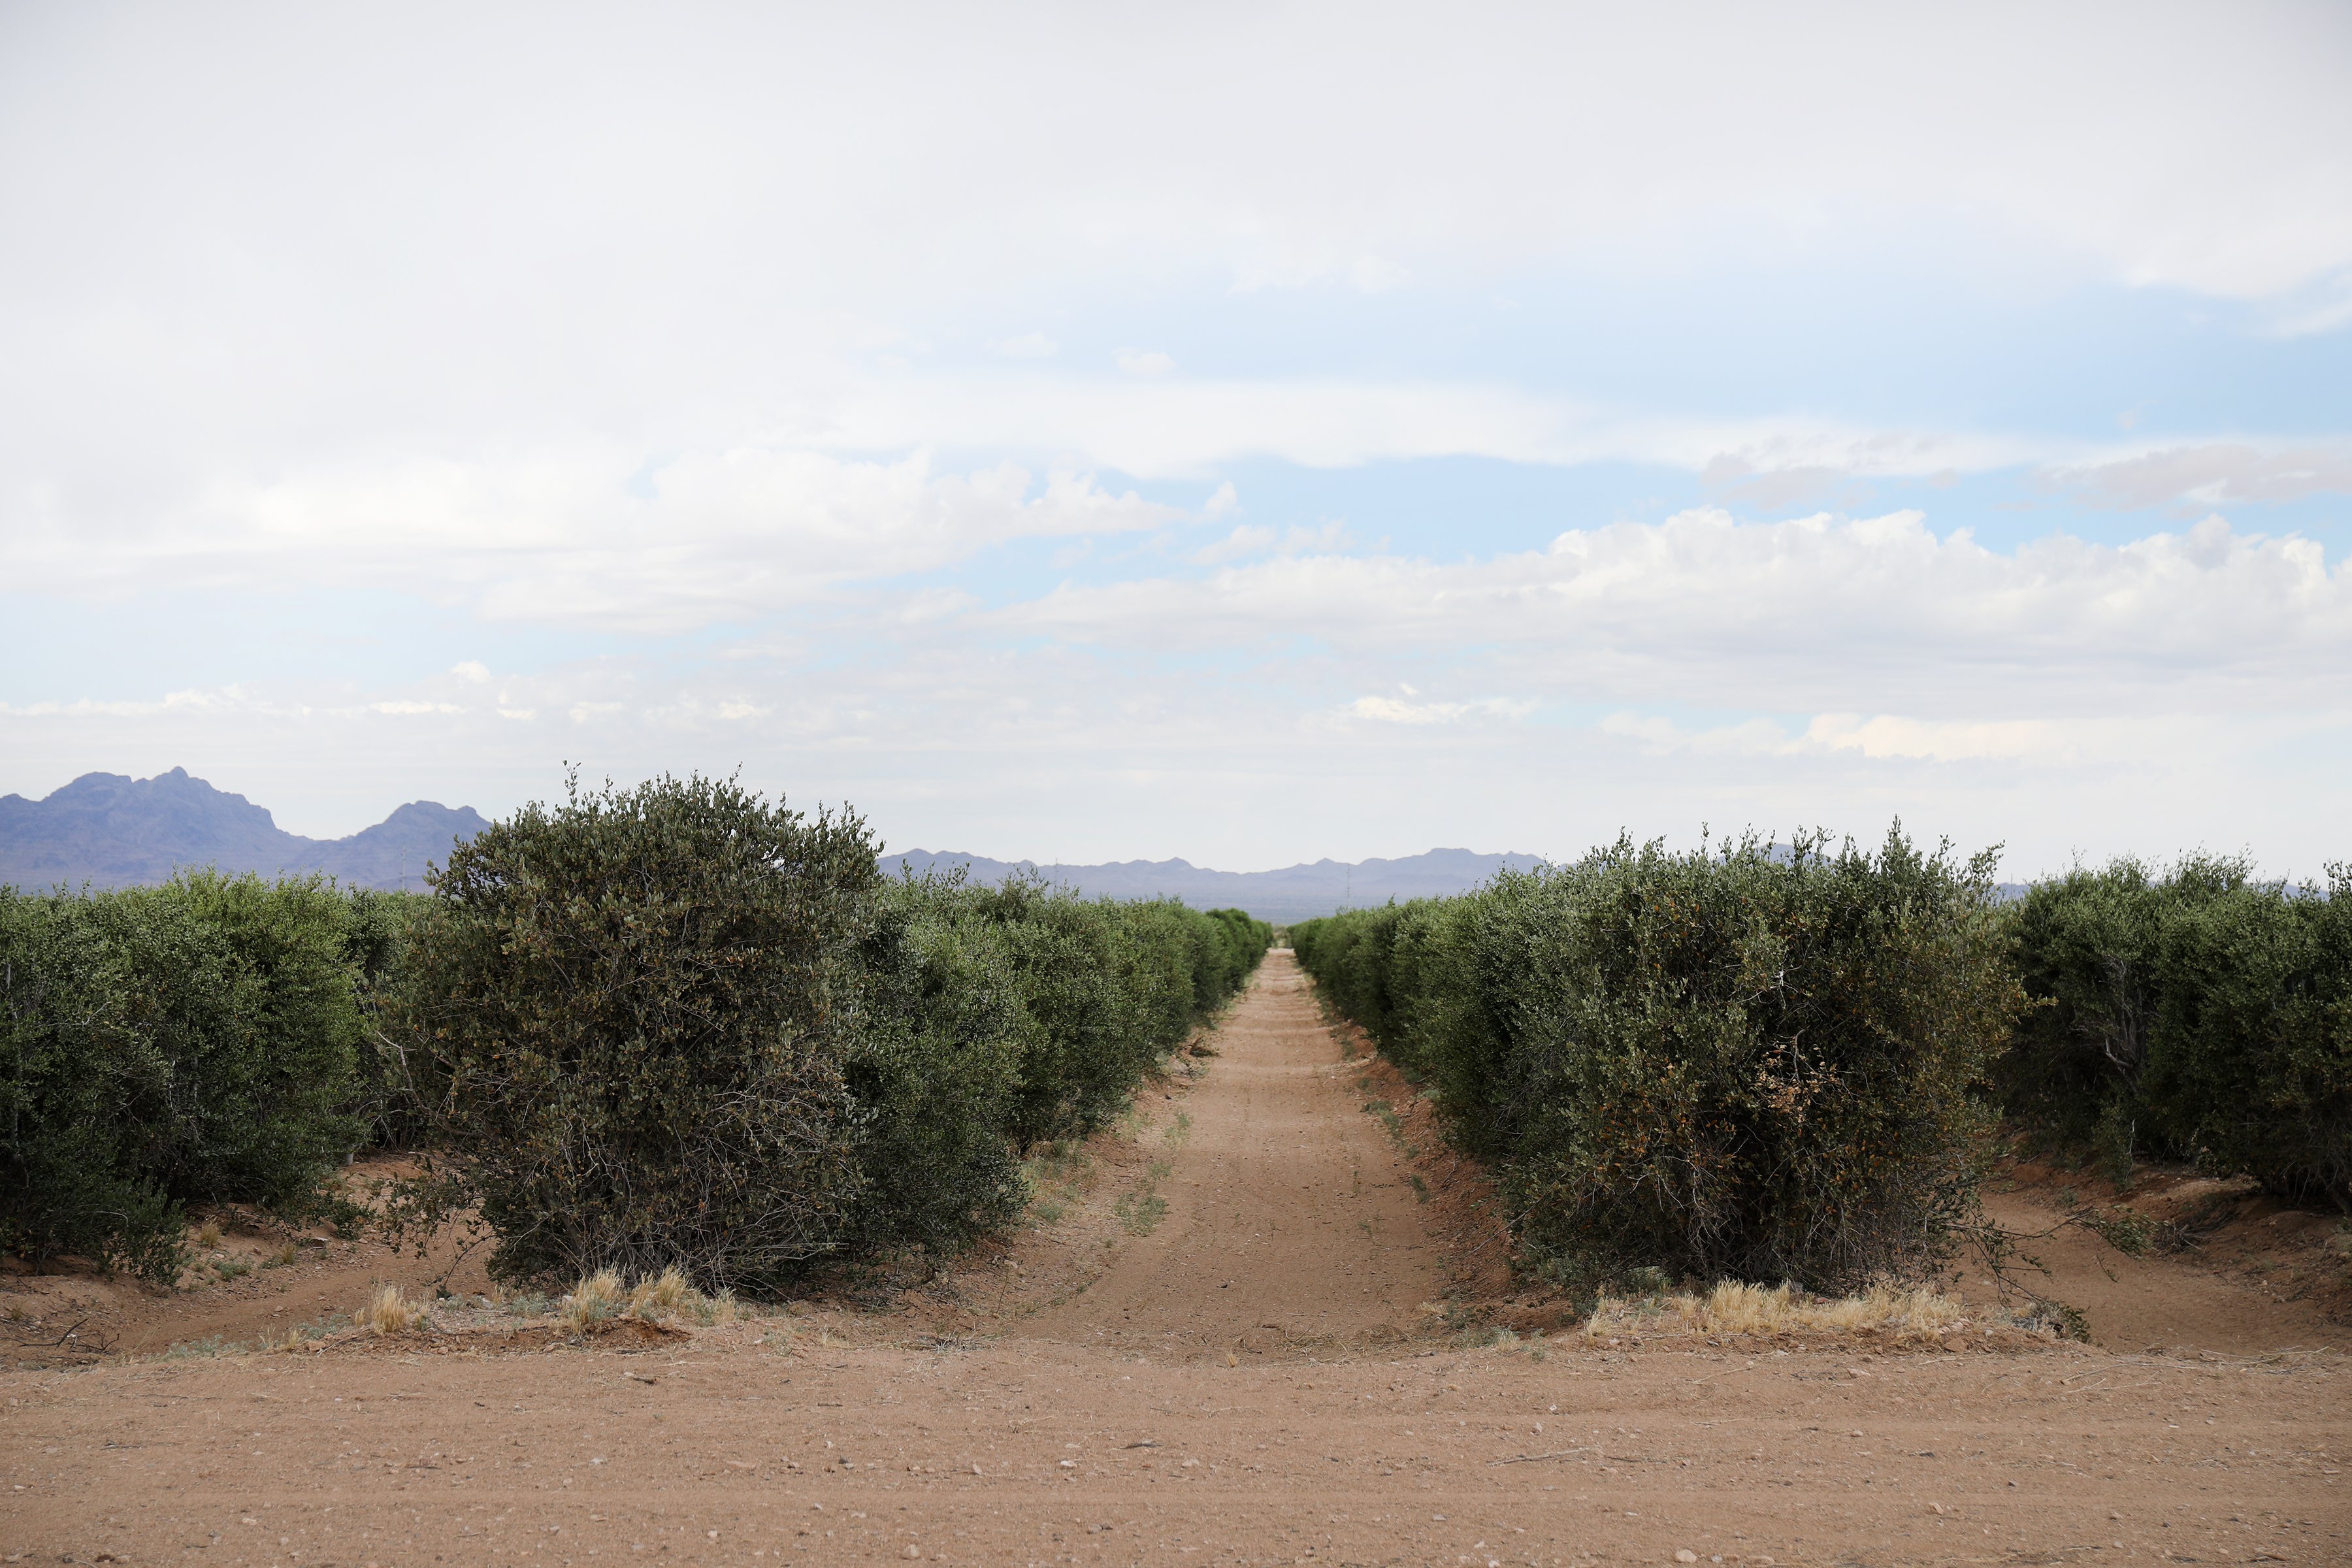 Rows of lush jojoba shrubs line the dusty desert landscape of Arizona ready to be harvested for their fruits to be turned into pure jojoba oil. 